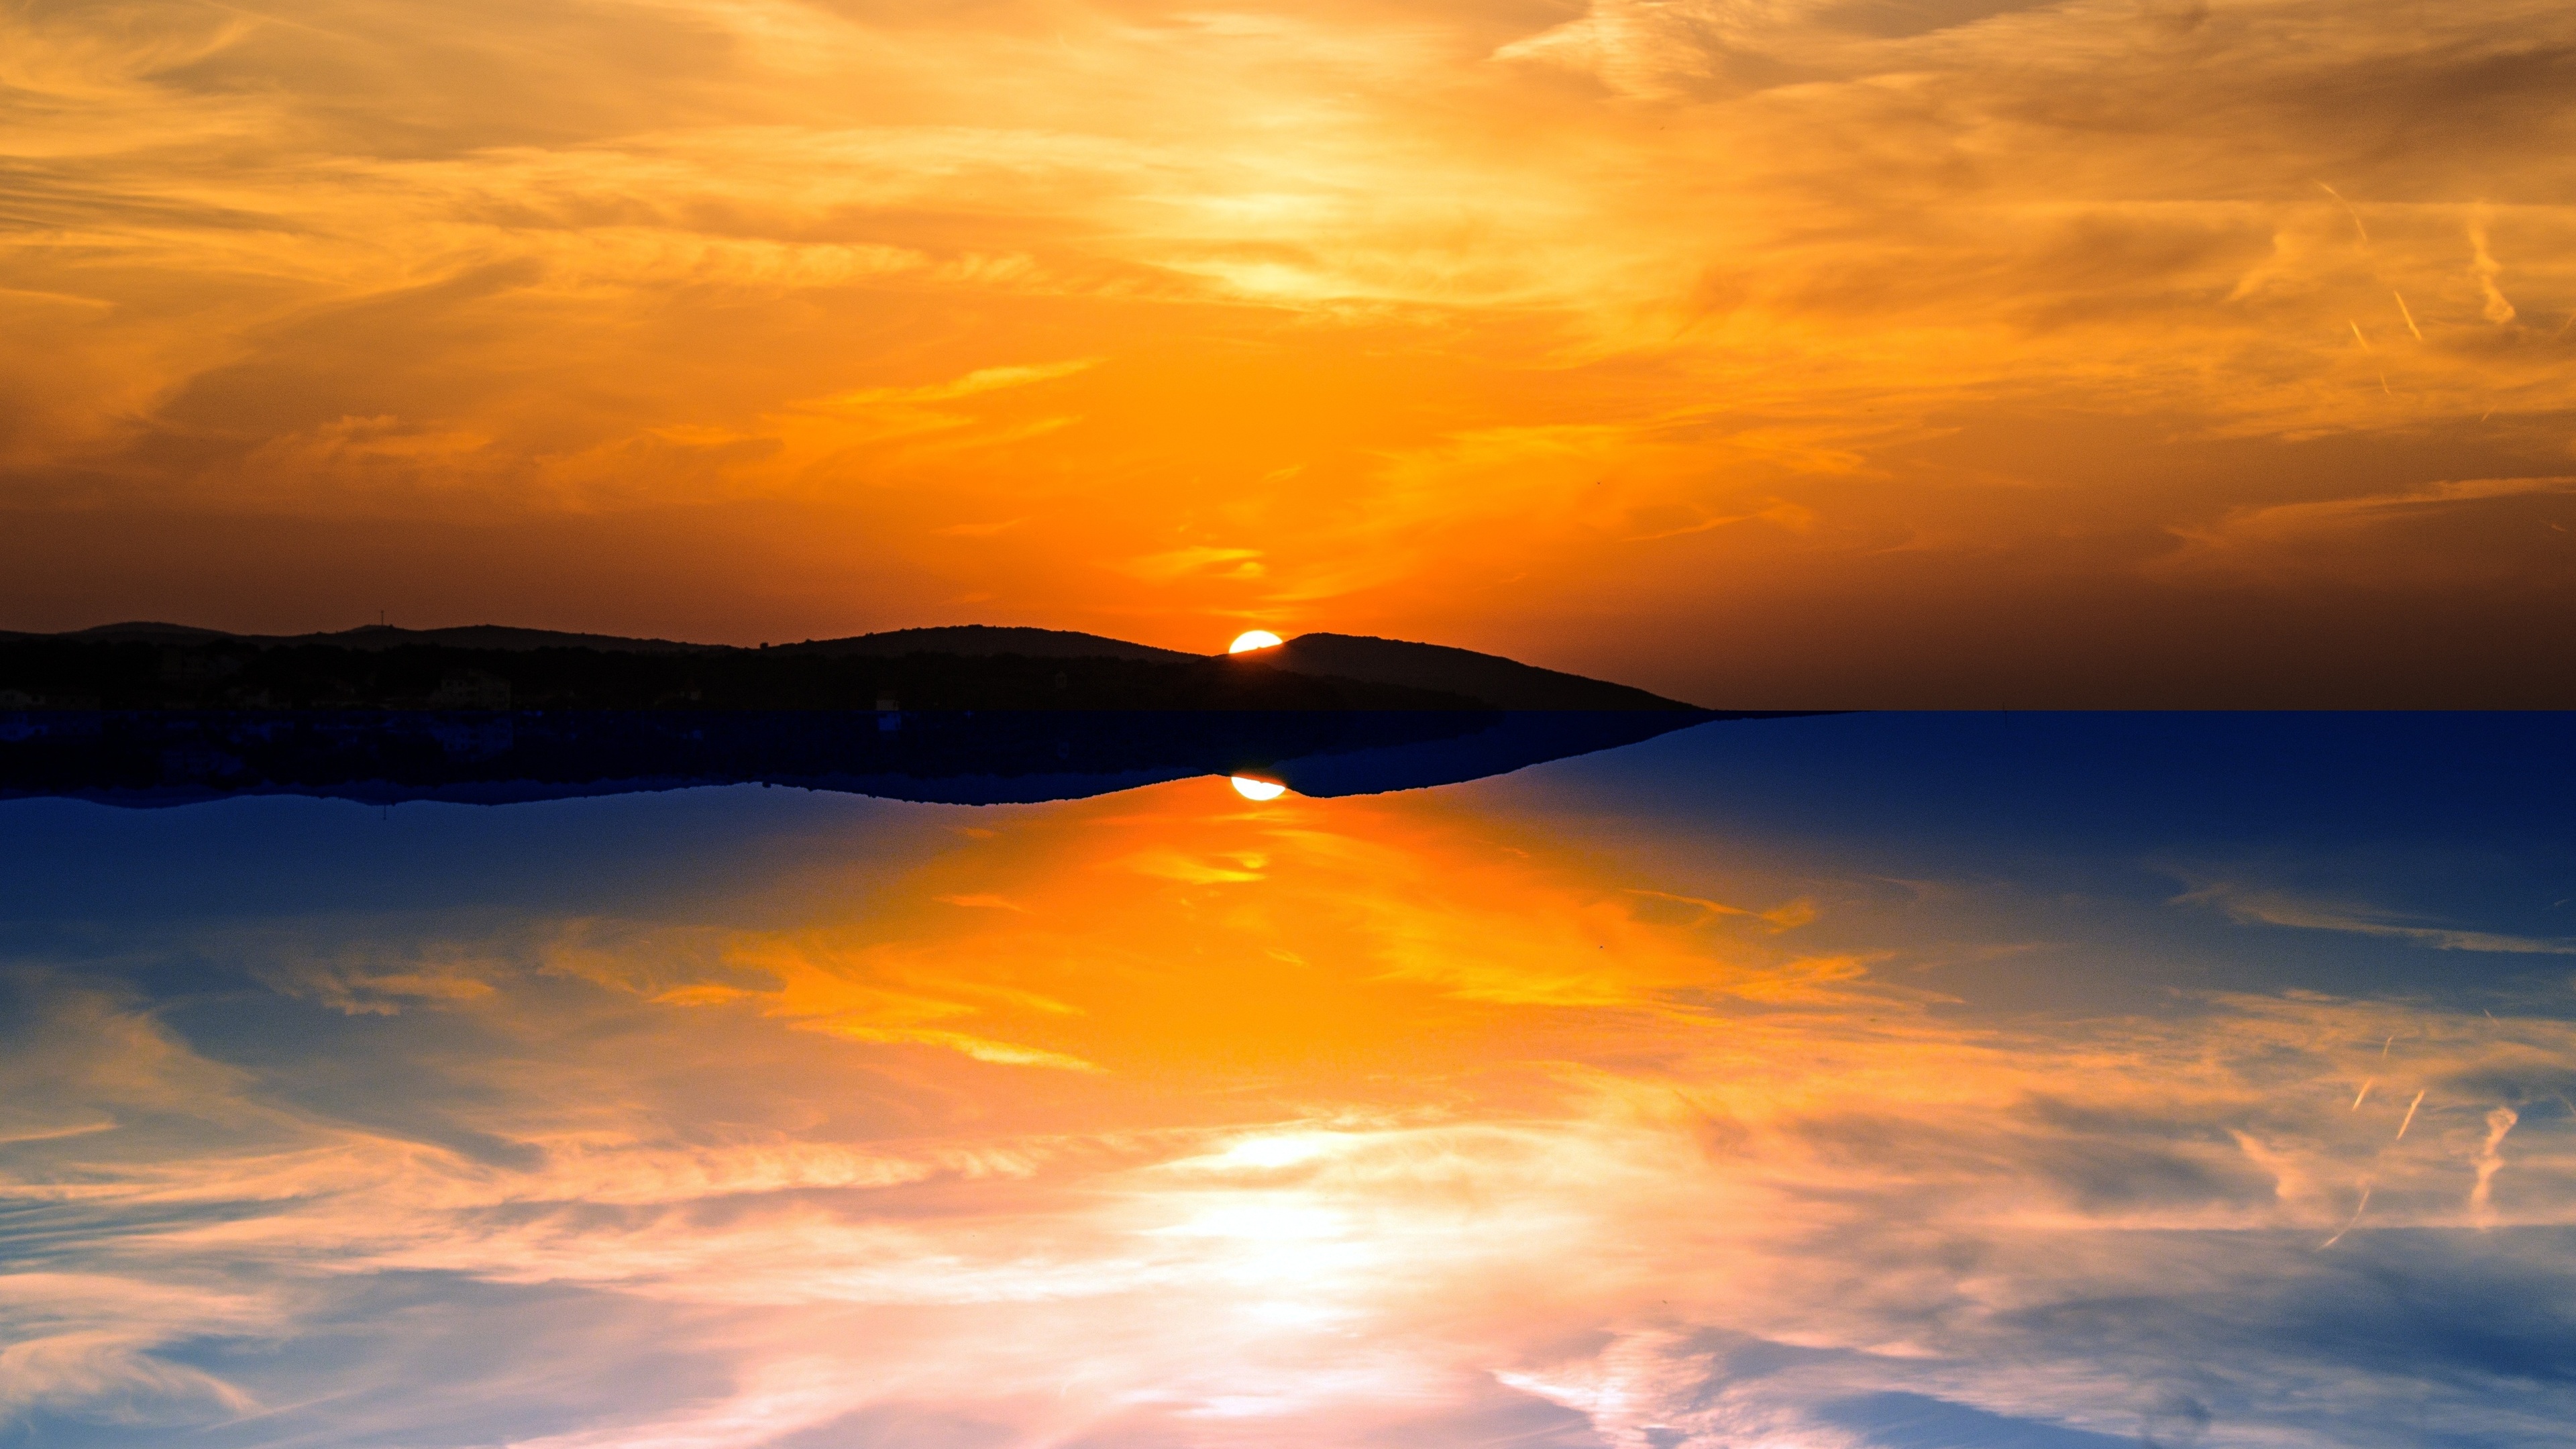 dreamy sunset reflection sea clouds 4k 1540134904 - Dreamy Sunset Reflection Sea Clouds 4k - sunset wallpapers, sea wallpapers, reflection wallpapers, nature wallpapers, hd-wallpapers, clouds wallpapers, 5k wallpapers, 4k-wallpapers